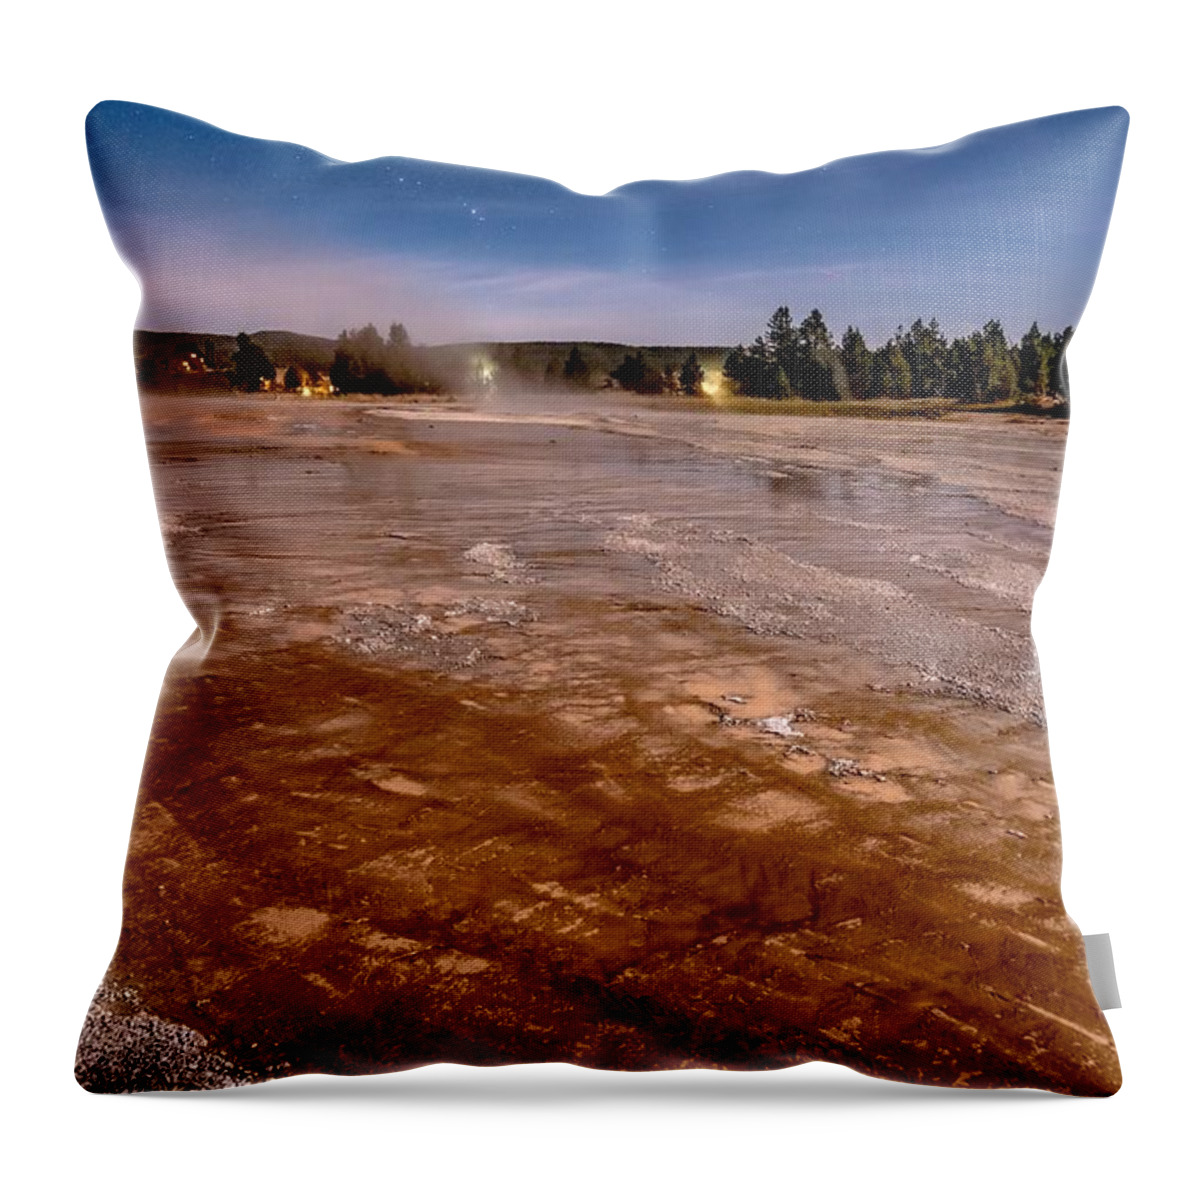 National Park Throw Pillow featuring the photograph Night Photo Os Old Faithful Geisers In Yellowstone National Park #2 by Alex Grichenko